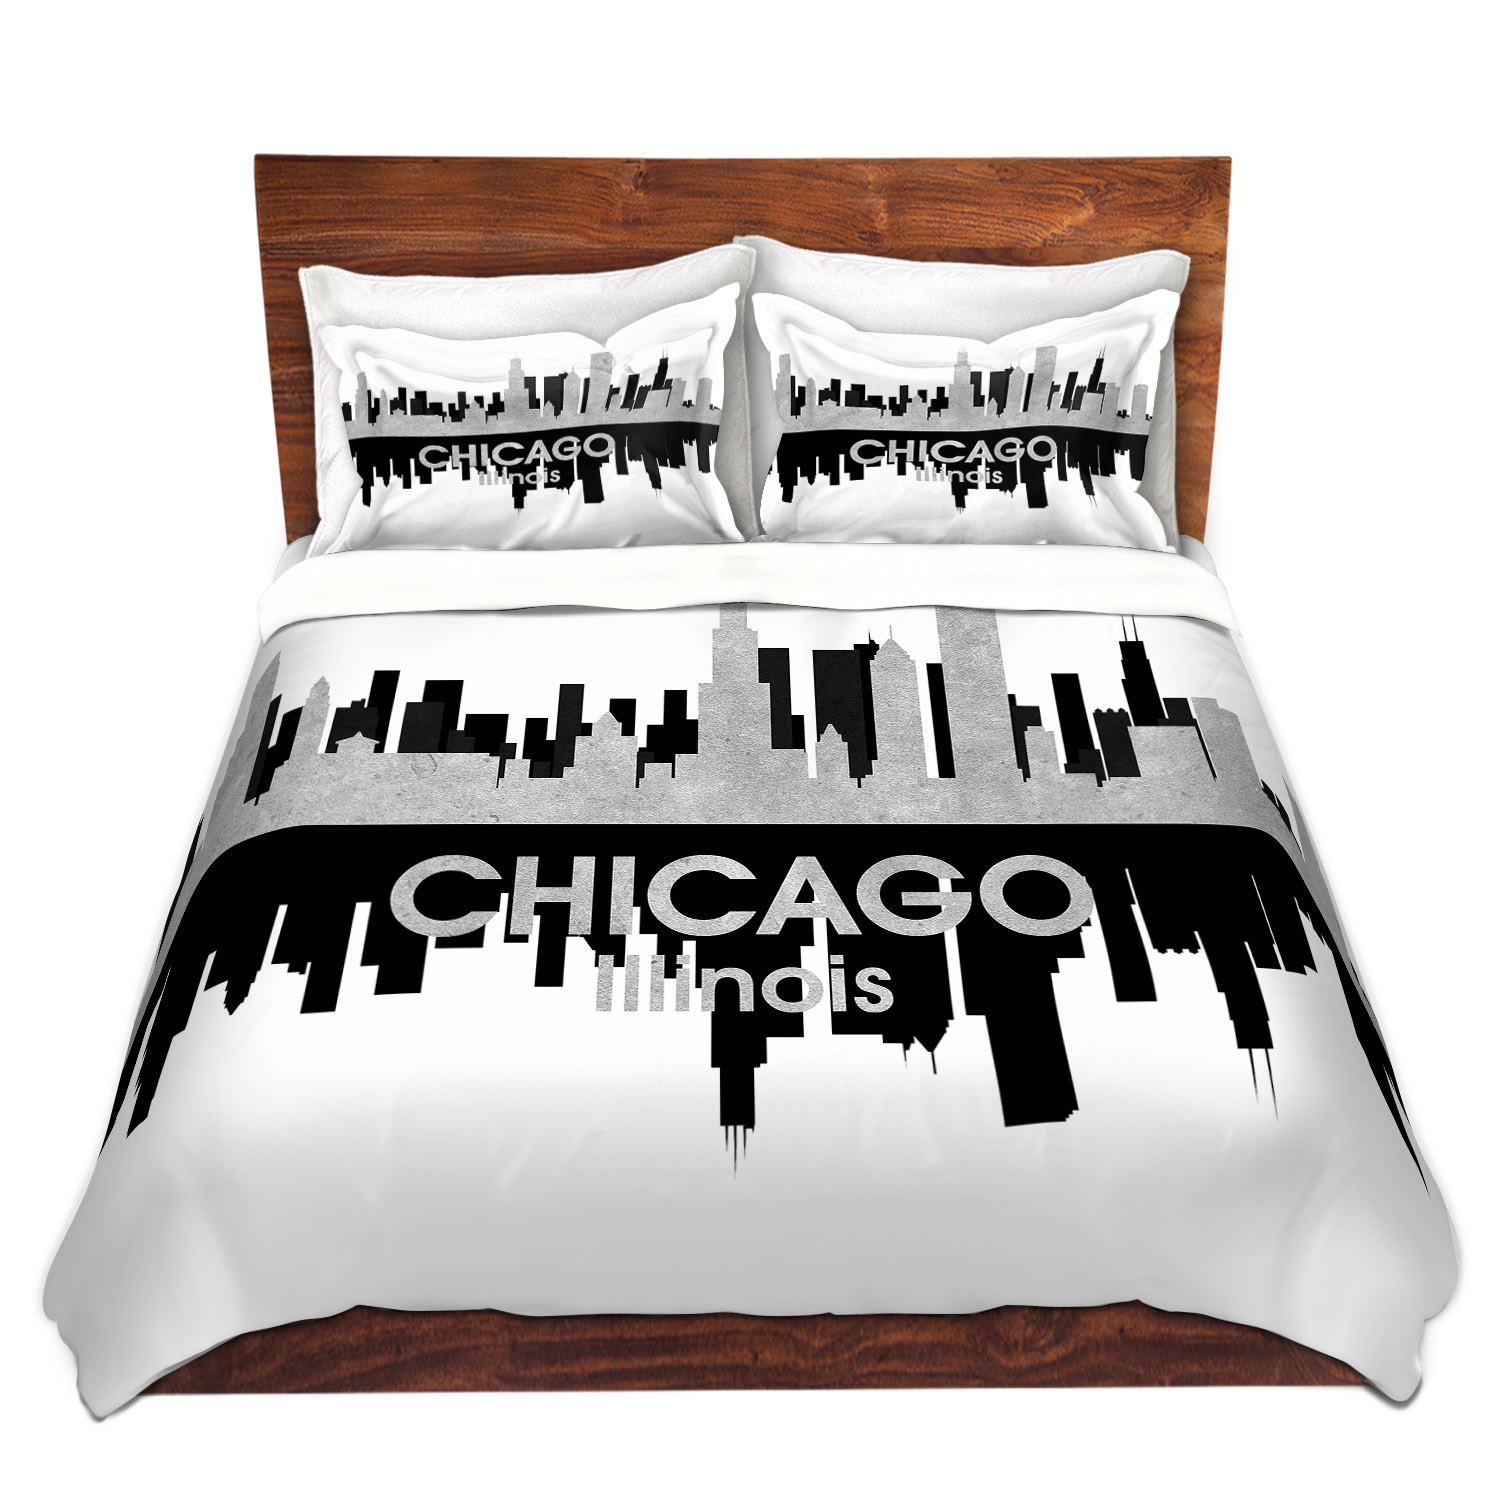 Dianoche Microfiber Duvet Covers By Angelina Vick - City Iv Chicago Illinois